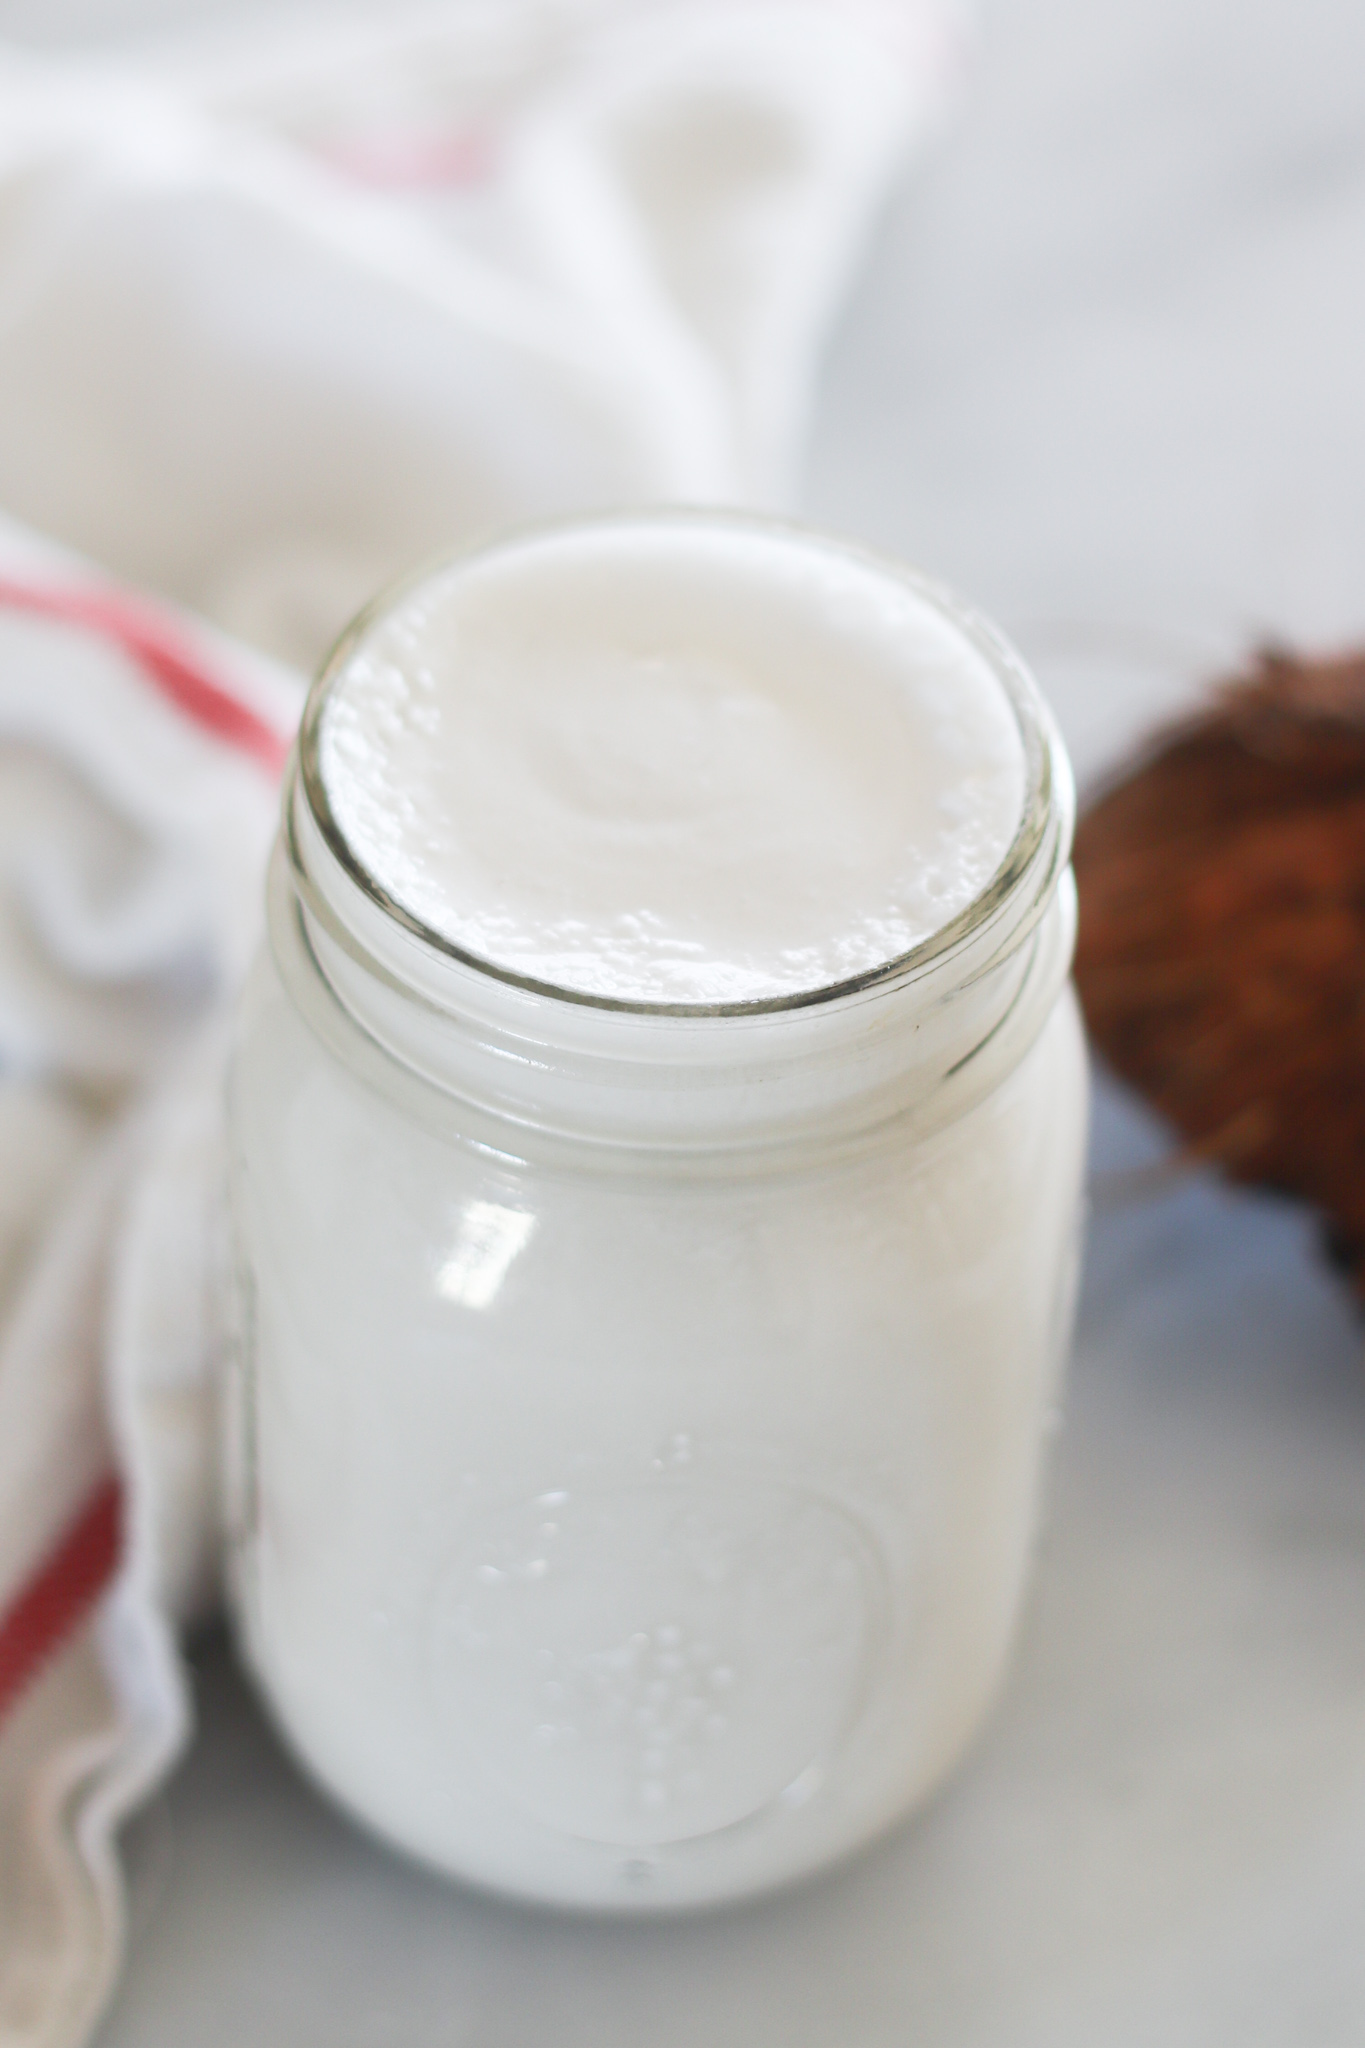 How to make Coconut Milk